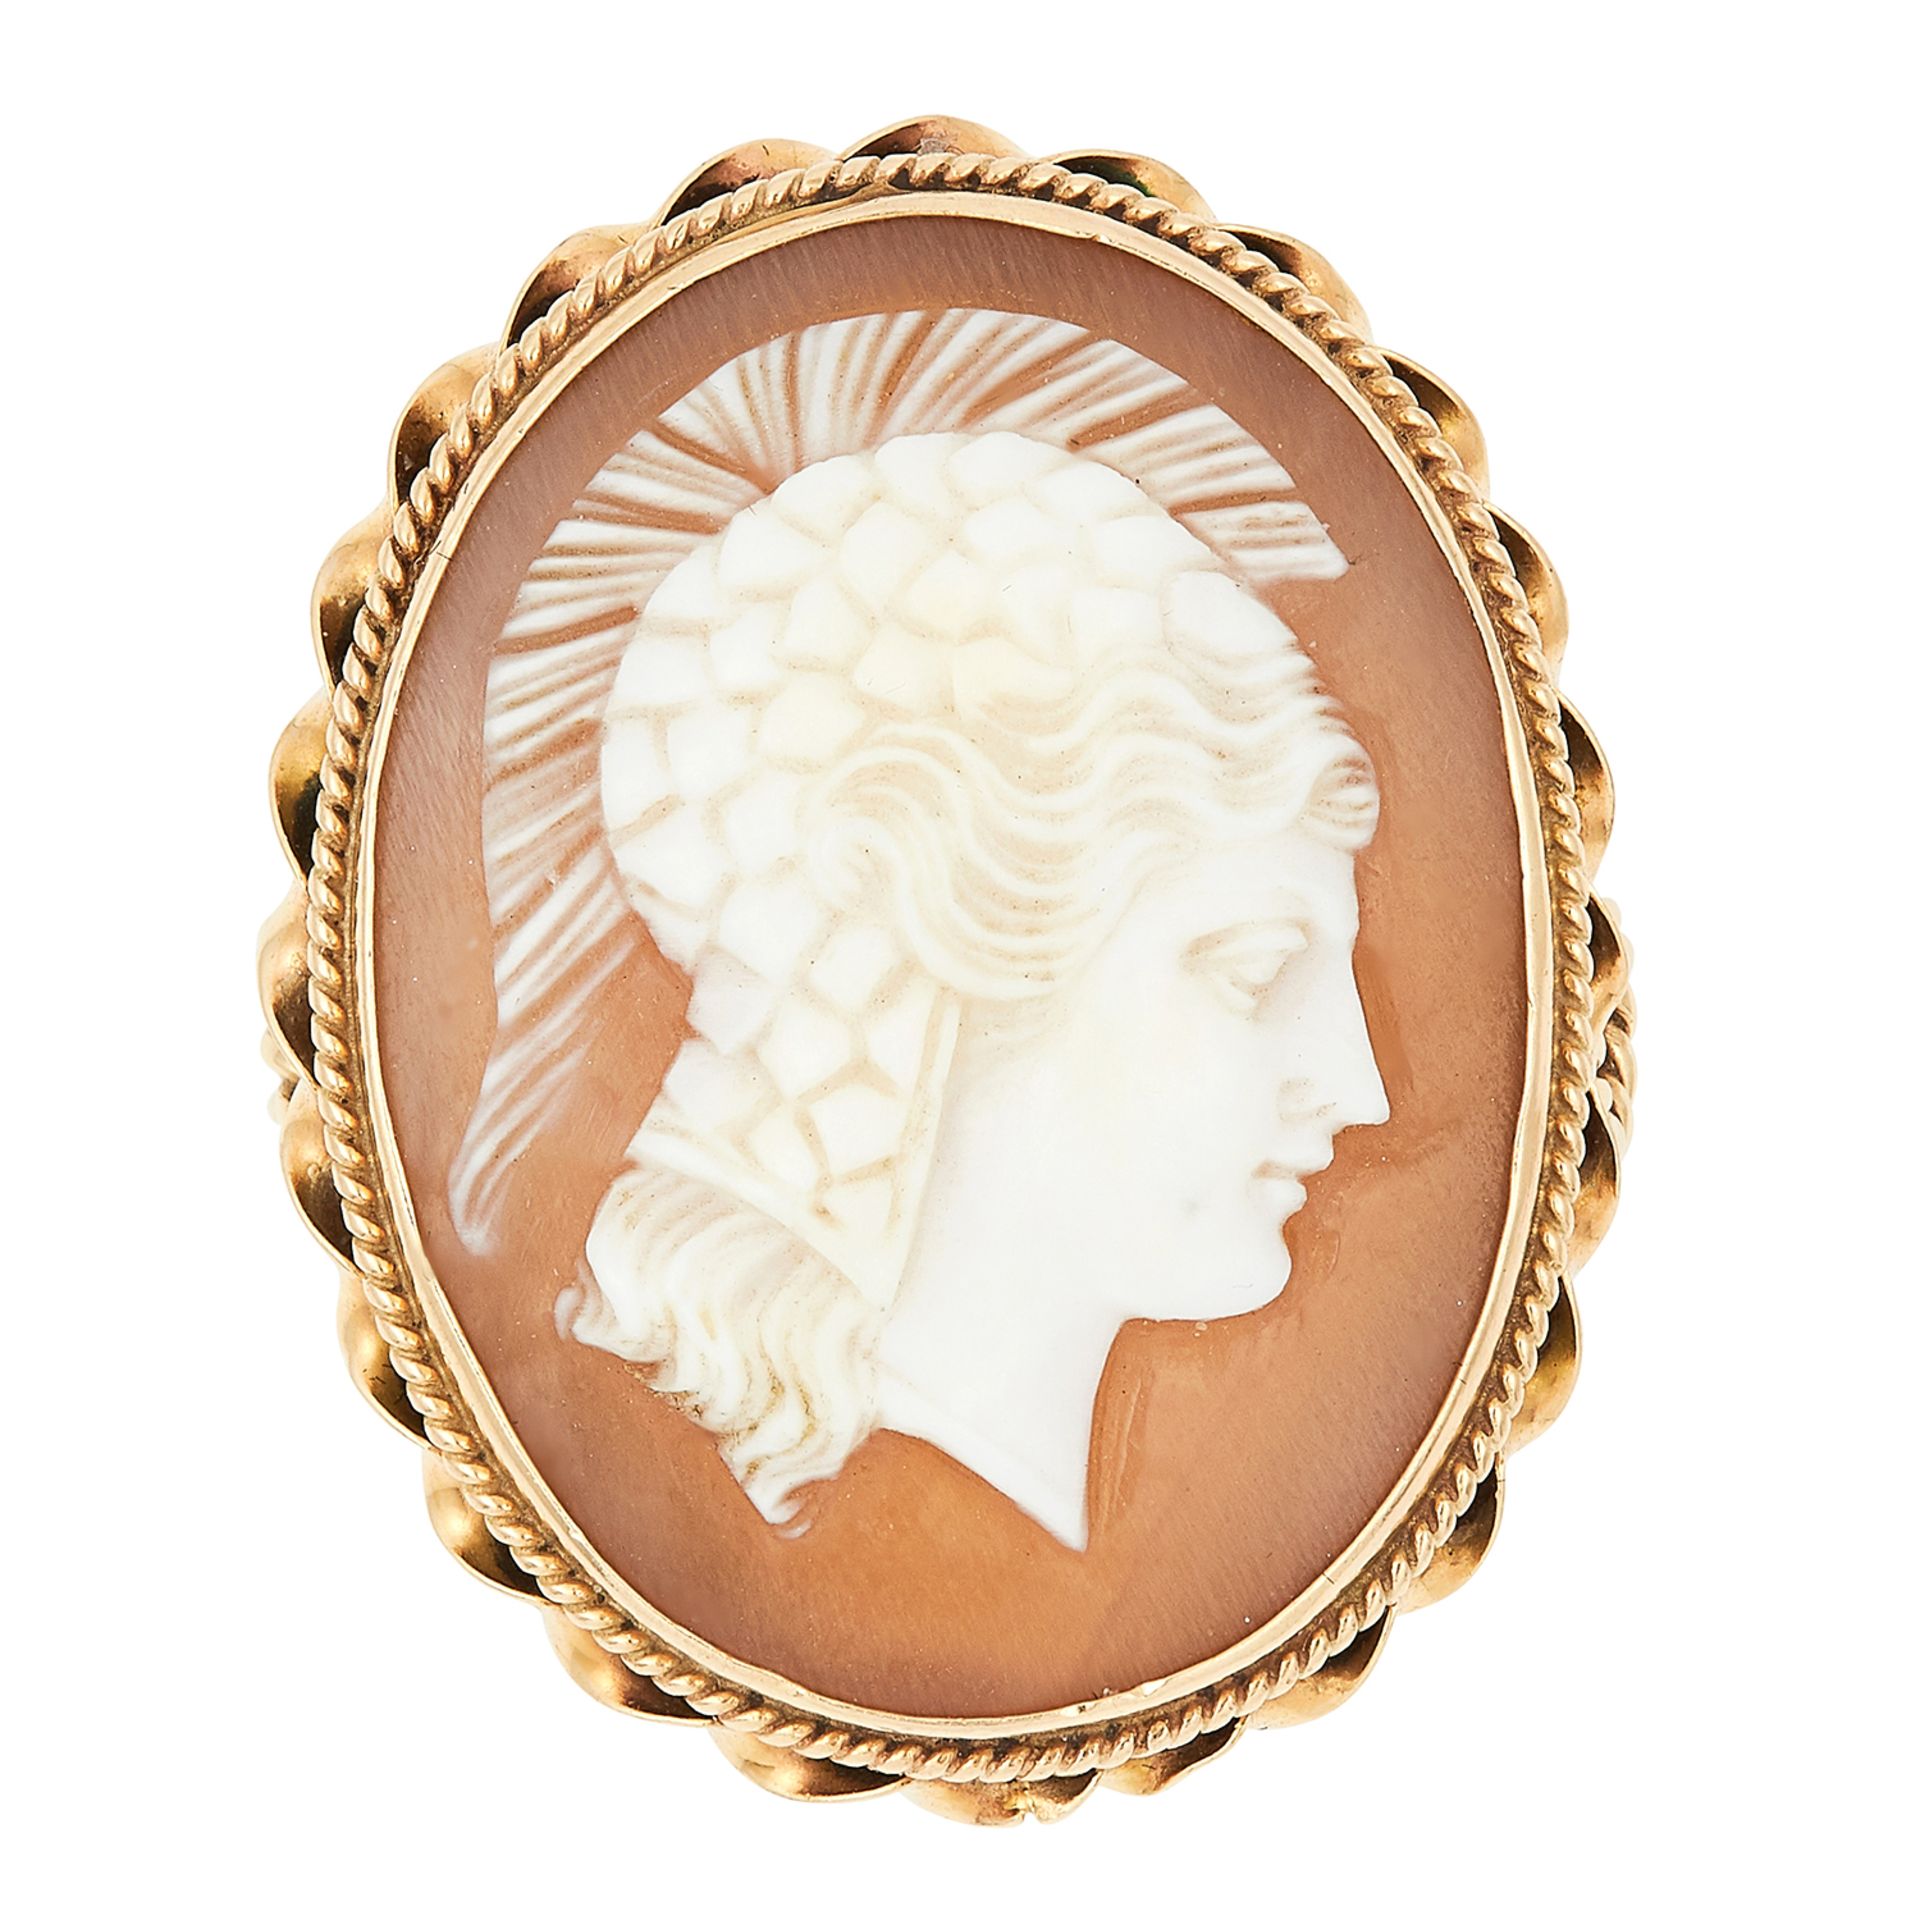 ANTIQUE CAMEO RING, depicting a Roman soldier in a decorative border, size L / 5.5, 6.1g.